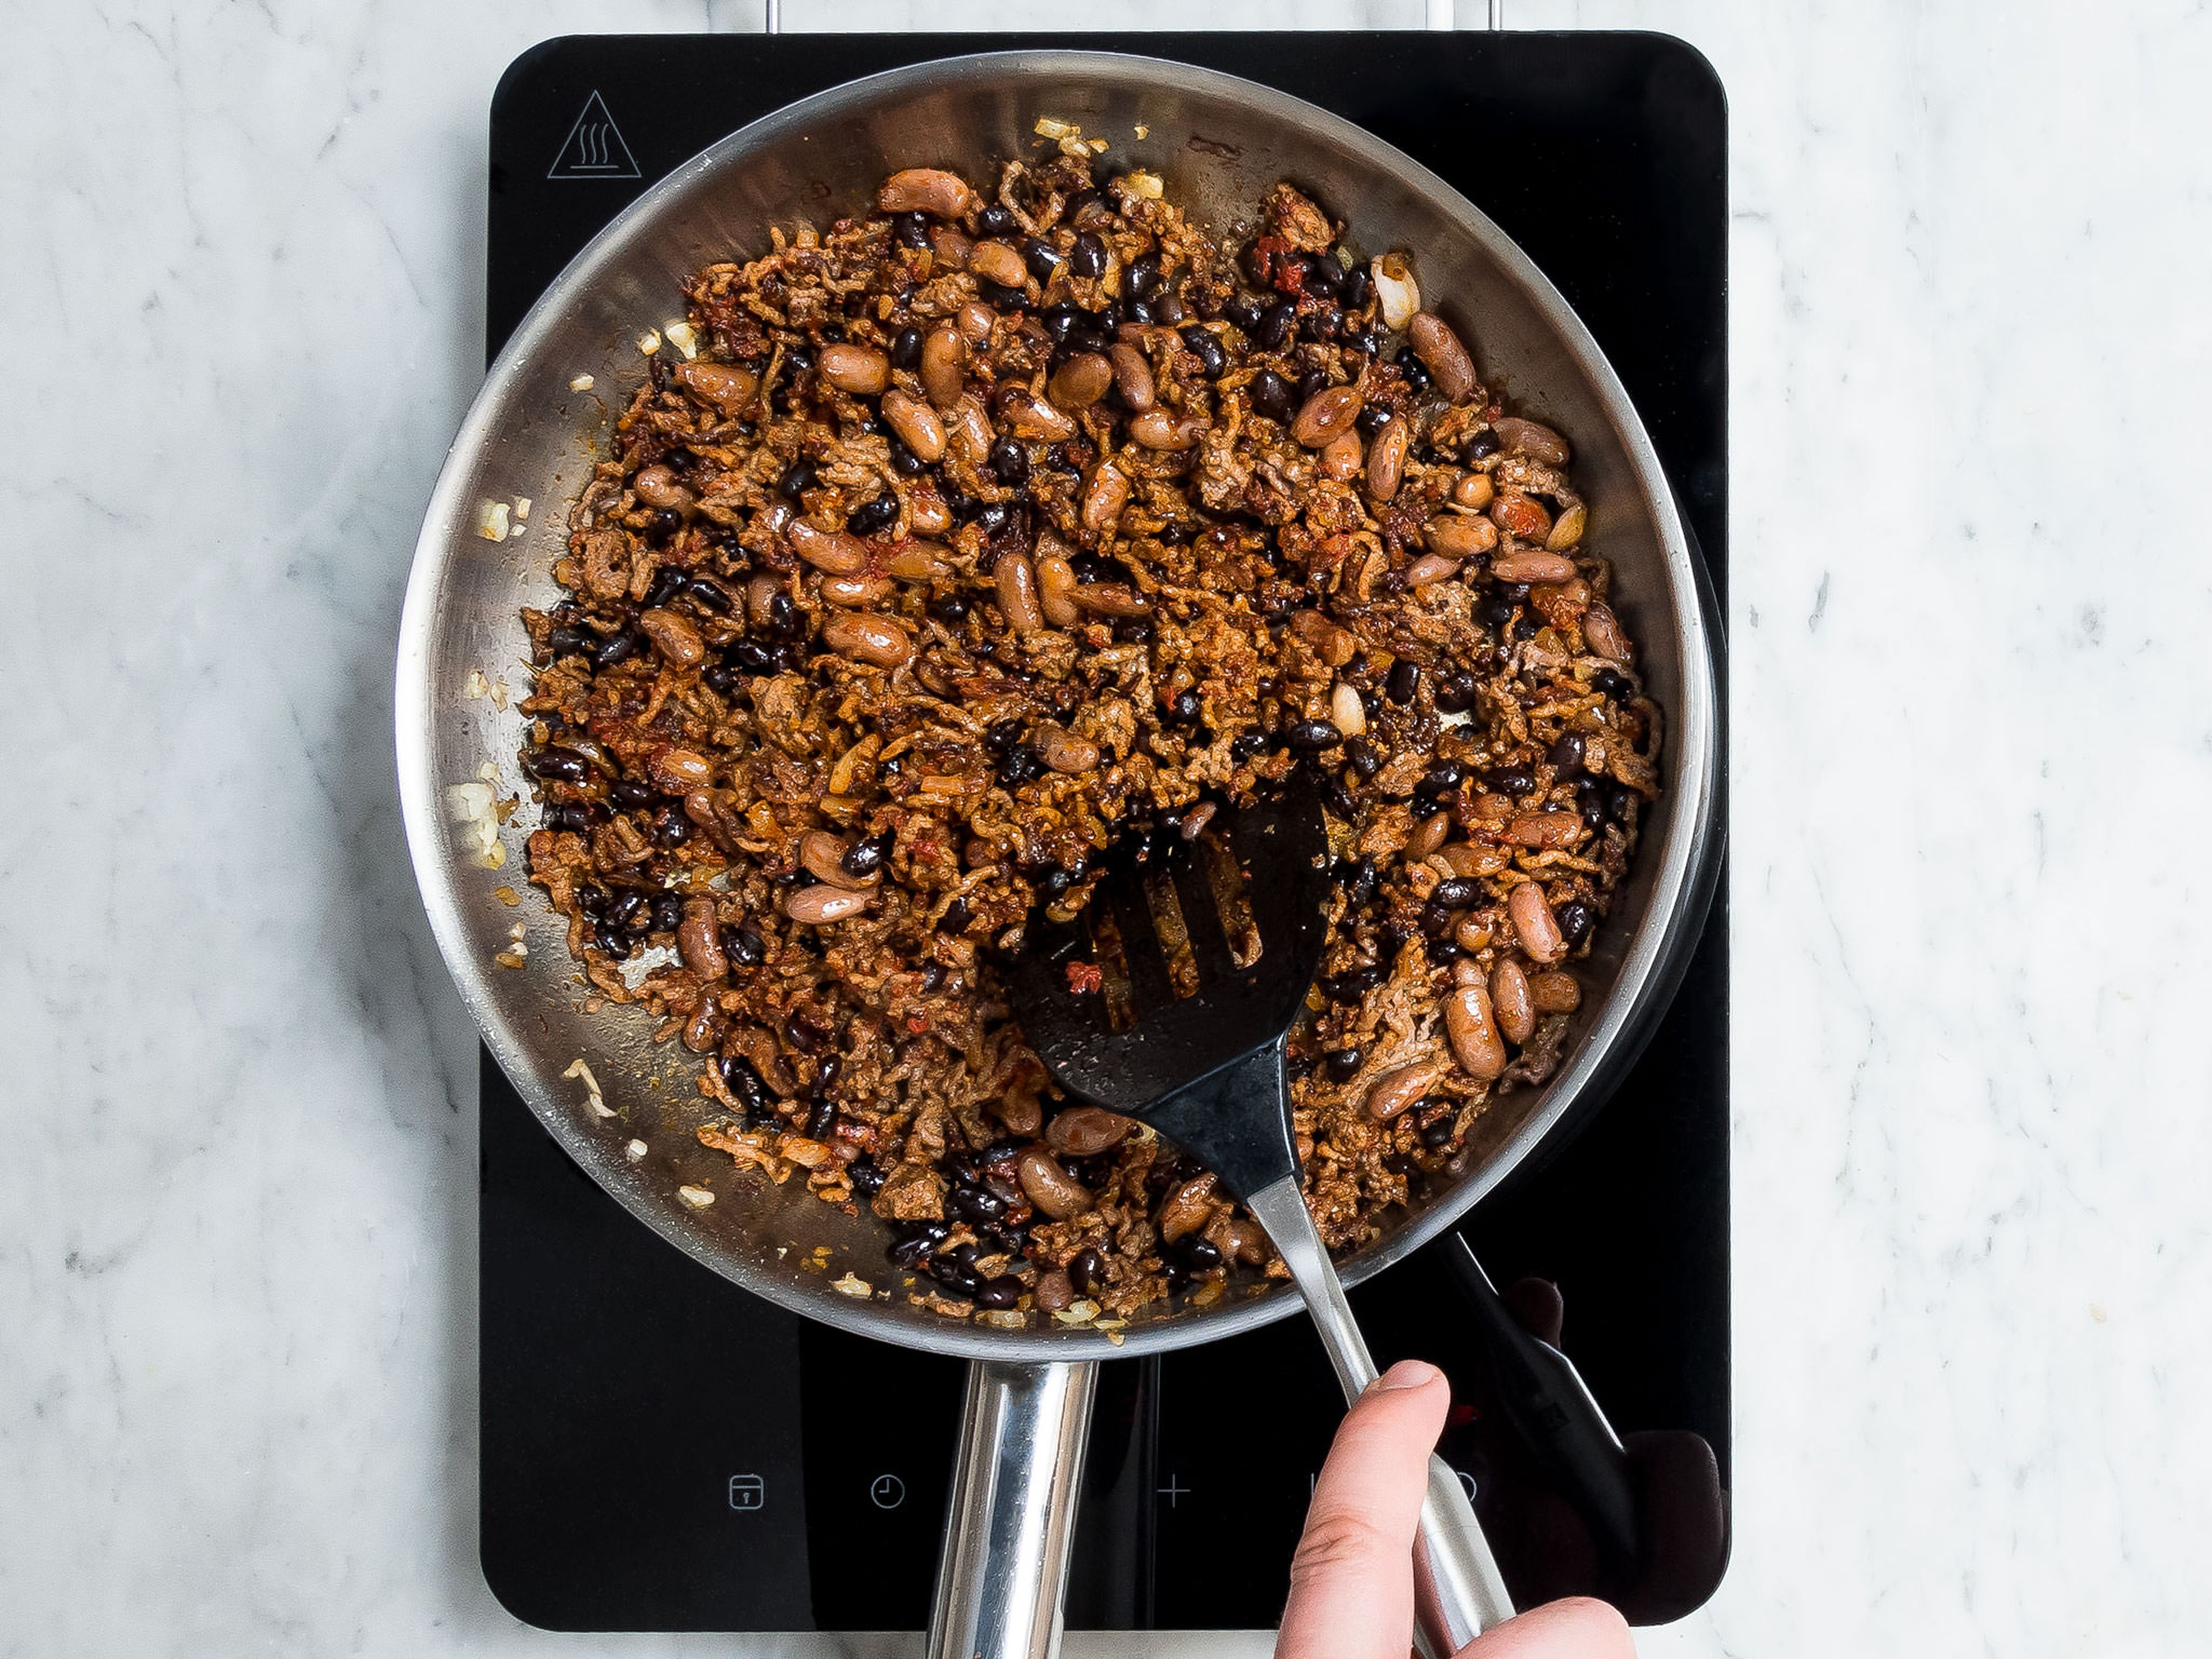 Preheat the oven to 180°C/370°F. Peel and dice onion. Drain and rinse canned beans. In a frying pan, heat olive oil and sauté diced onion. Add ground beef and fry for approx. 1 – 2 min. Add chili powder, paprika powder, ground cumin, Cayenne pepper, dried oregano, and sugar and season with pepper and salt. Mix well and fry for another 2 – 3 min. Stir in pinto beans, black beans, and tomato paste, then remove frying pan from heat.